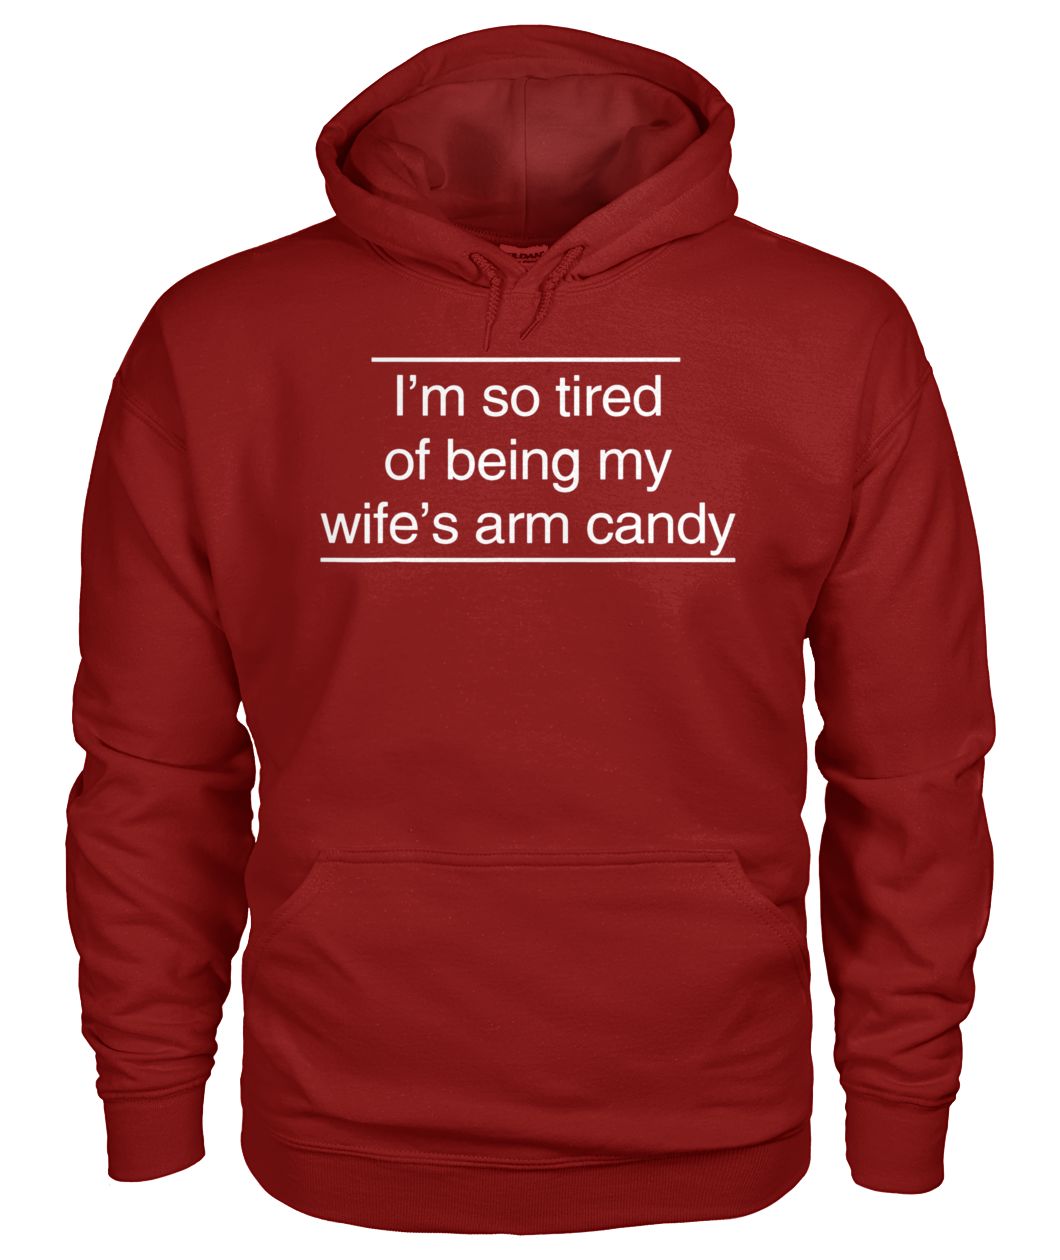 I'm tired of being my wife's arm candy gildan hoodie